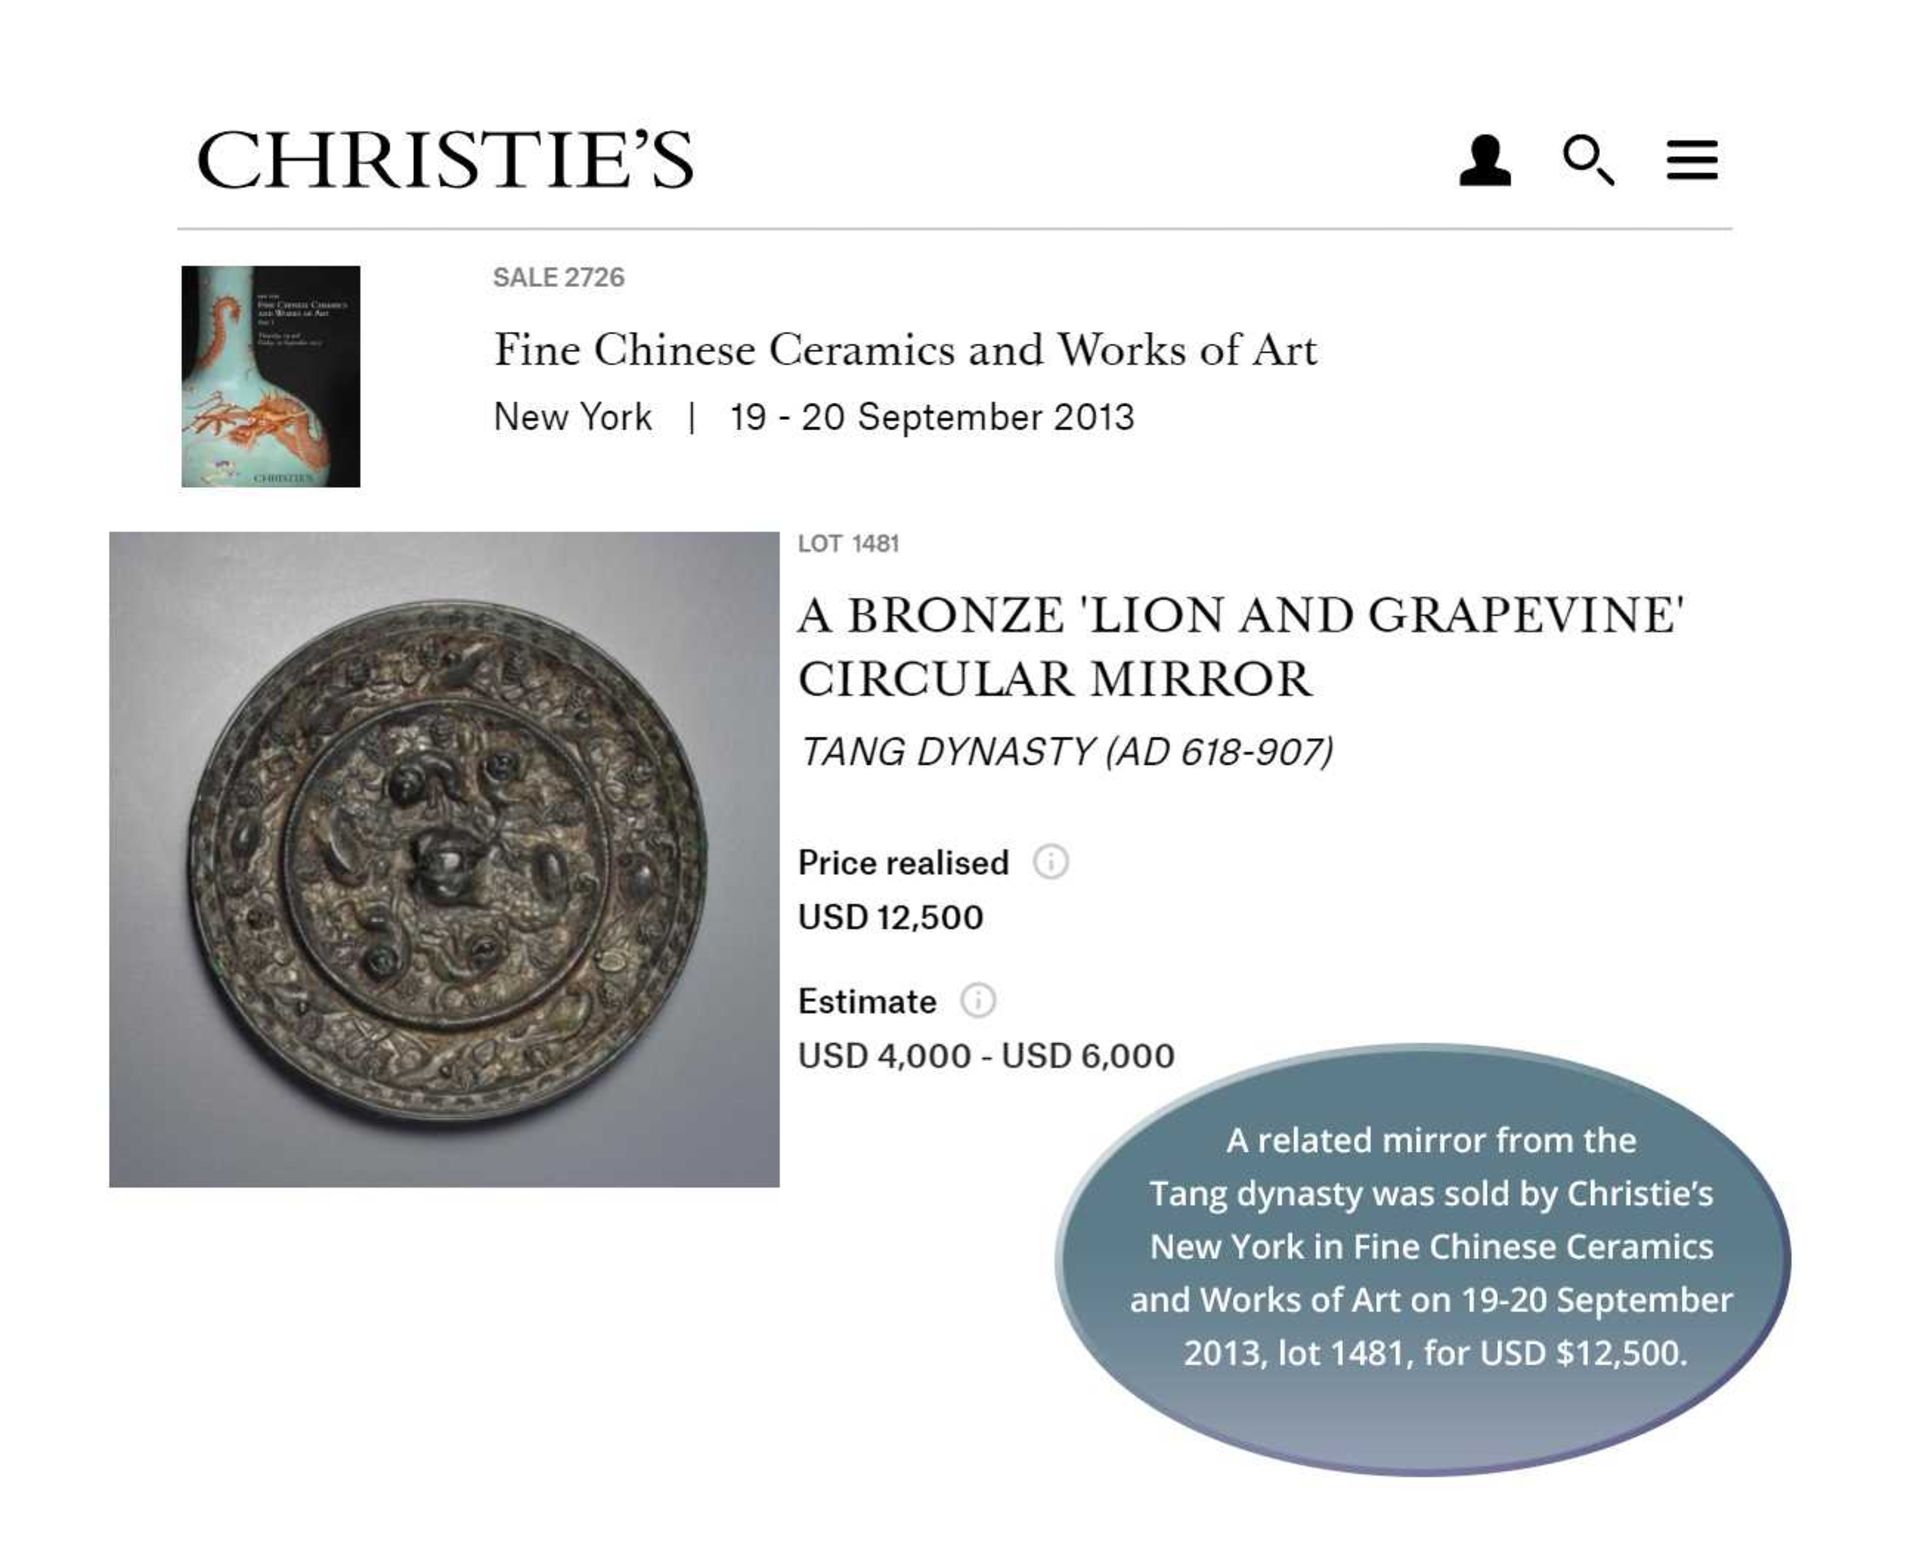 A BRONZE ‘LION AND GRAPEVINE’ MIRROR, FIVE DYNASTIES - Image 3 of 3